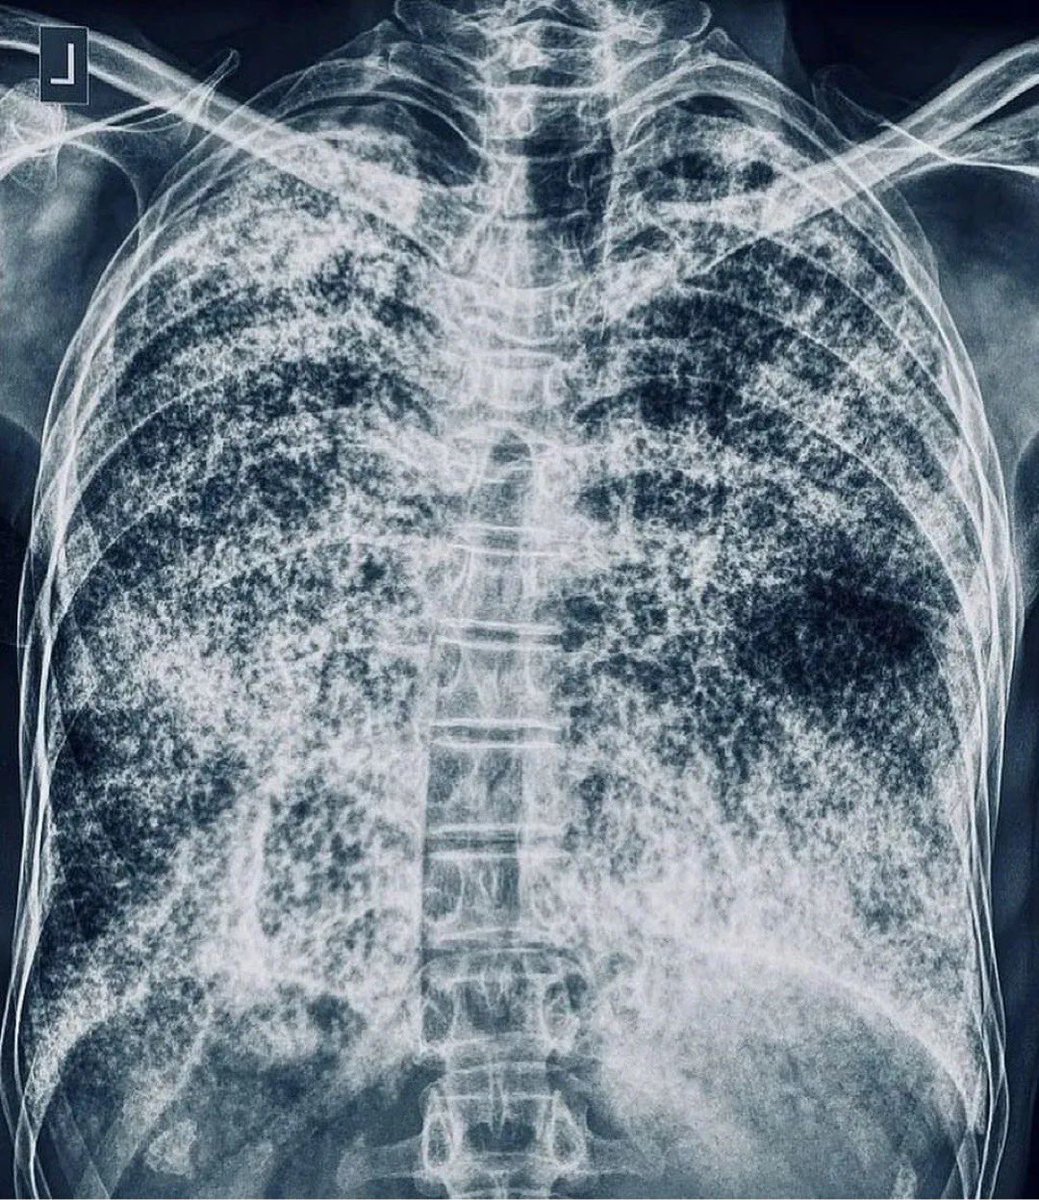 A patient with progressive dyspnea and dry cough for 3 months. Chest X-ray reveals a “vanished heart”. 

What is the diagnosis?